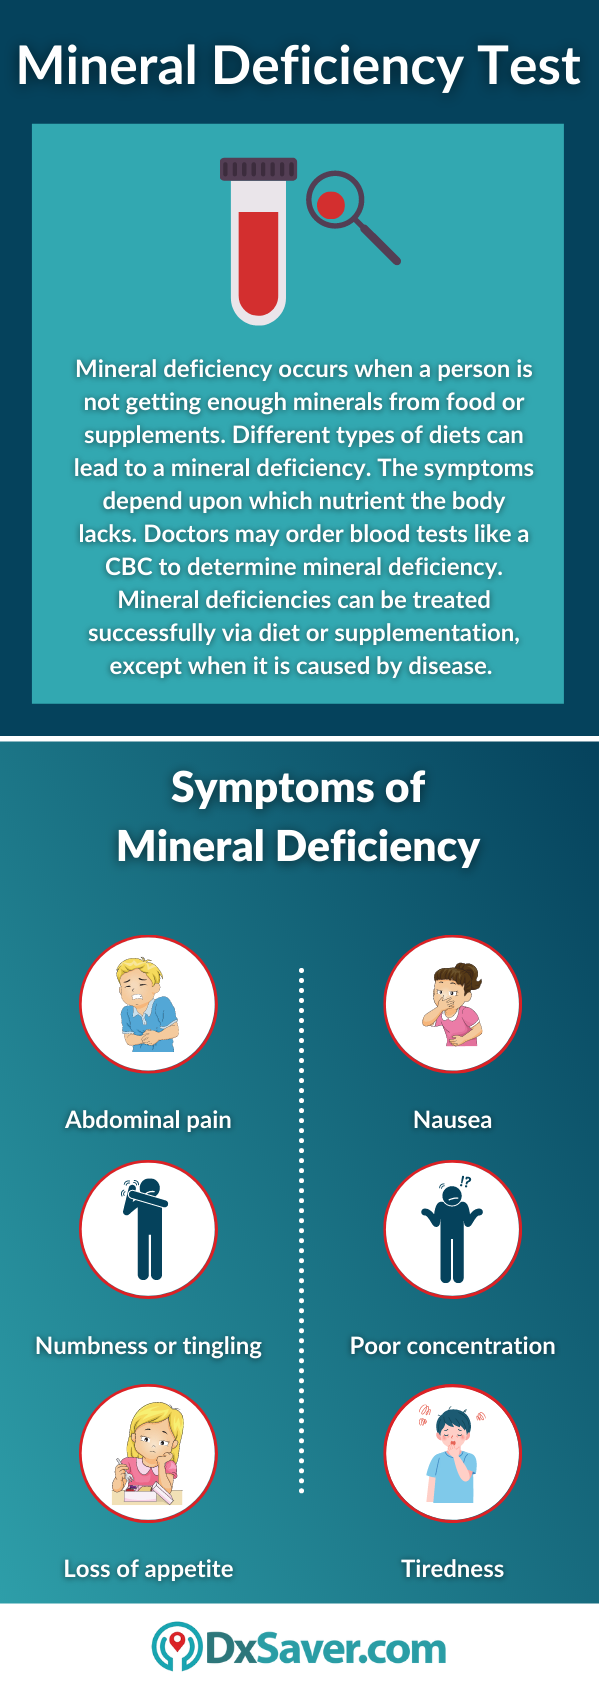 Mineral Deficiency Test and its Symptoms